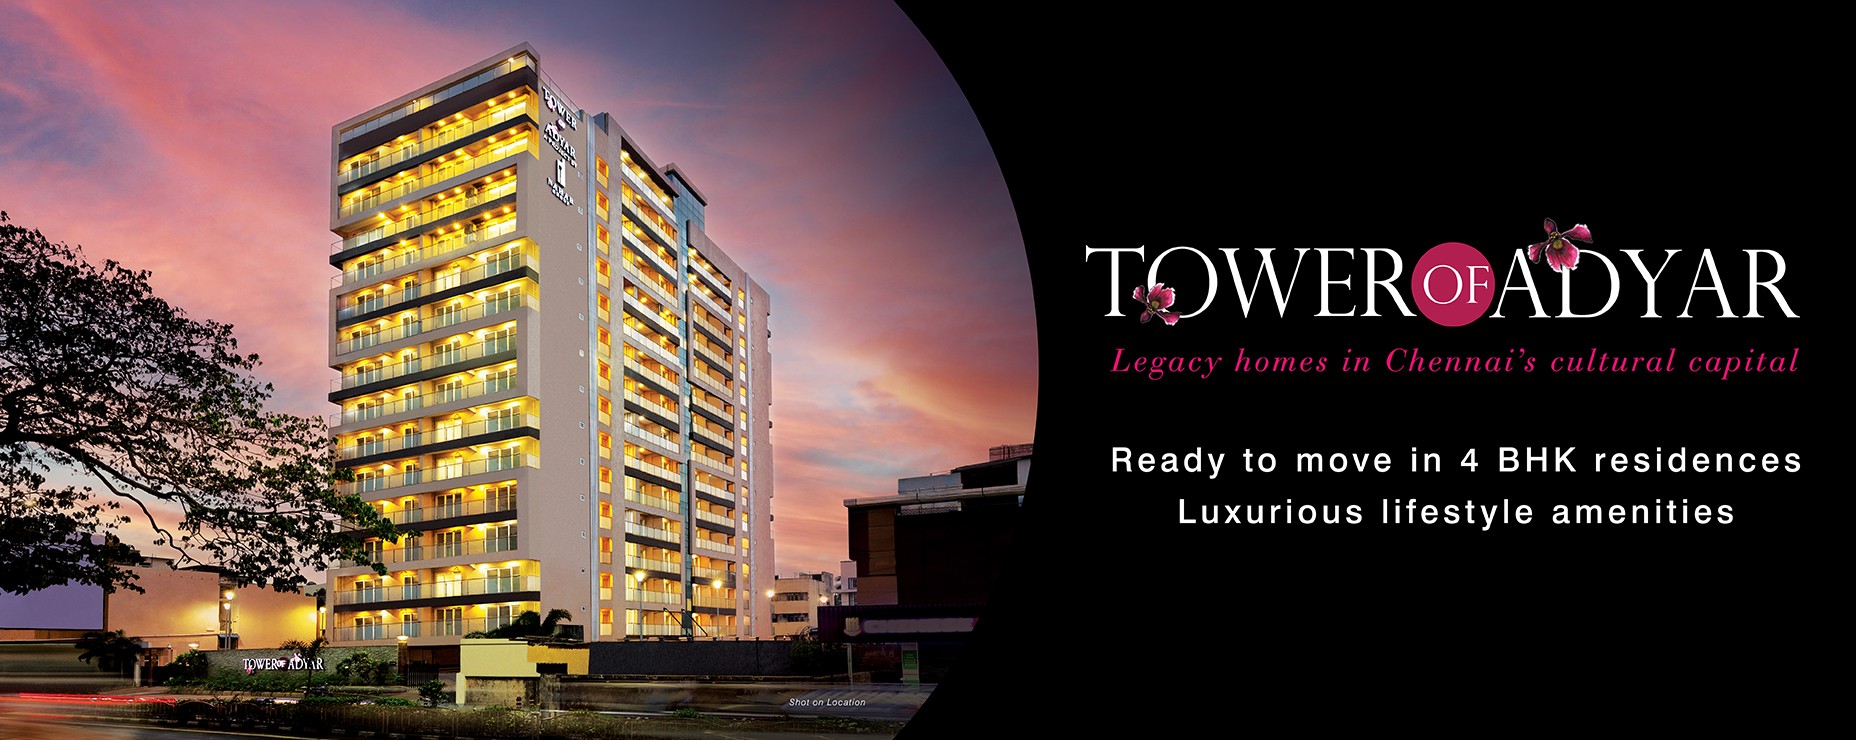 Ready To Move In 4 BHK Residences - Tower of Adyar - Nahar Group